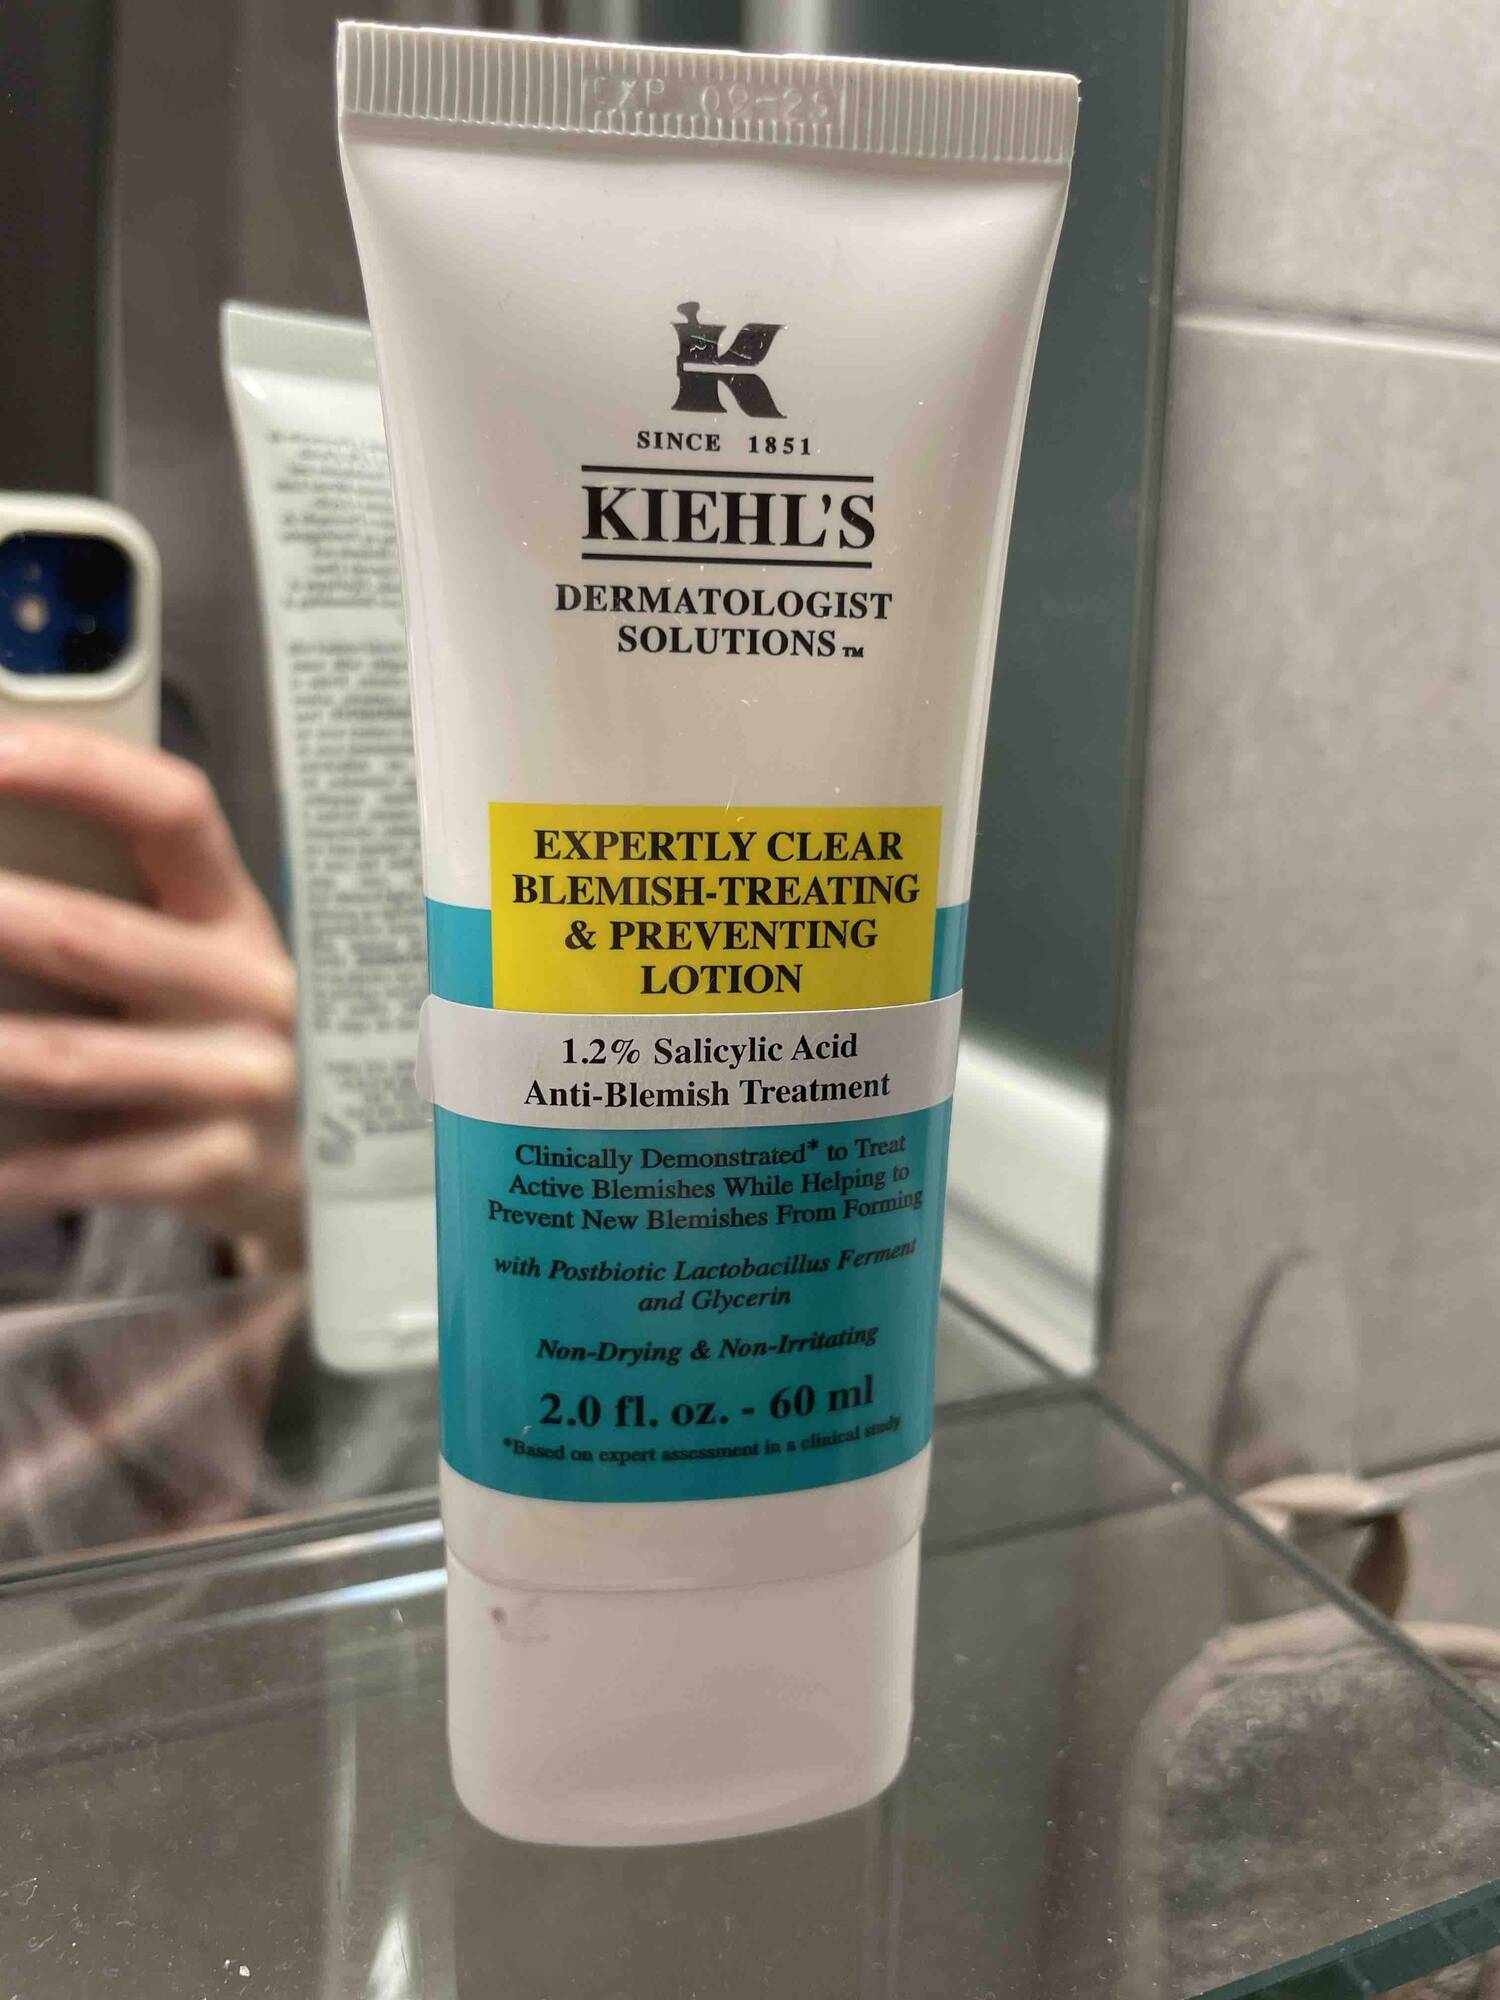 KIEHL'S - Expertly clear blemish-treating & preventing lotion